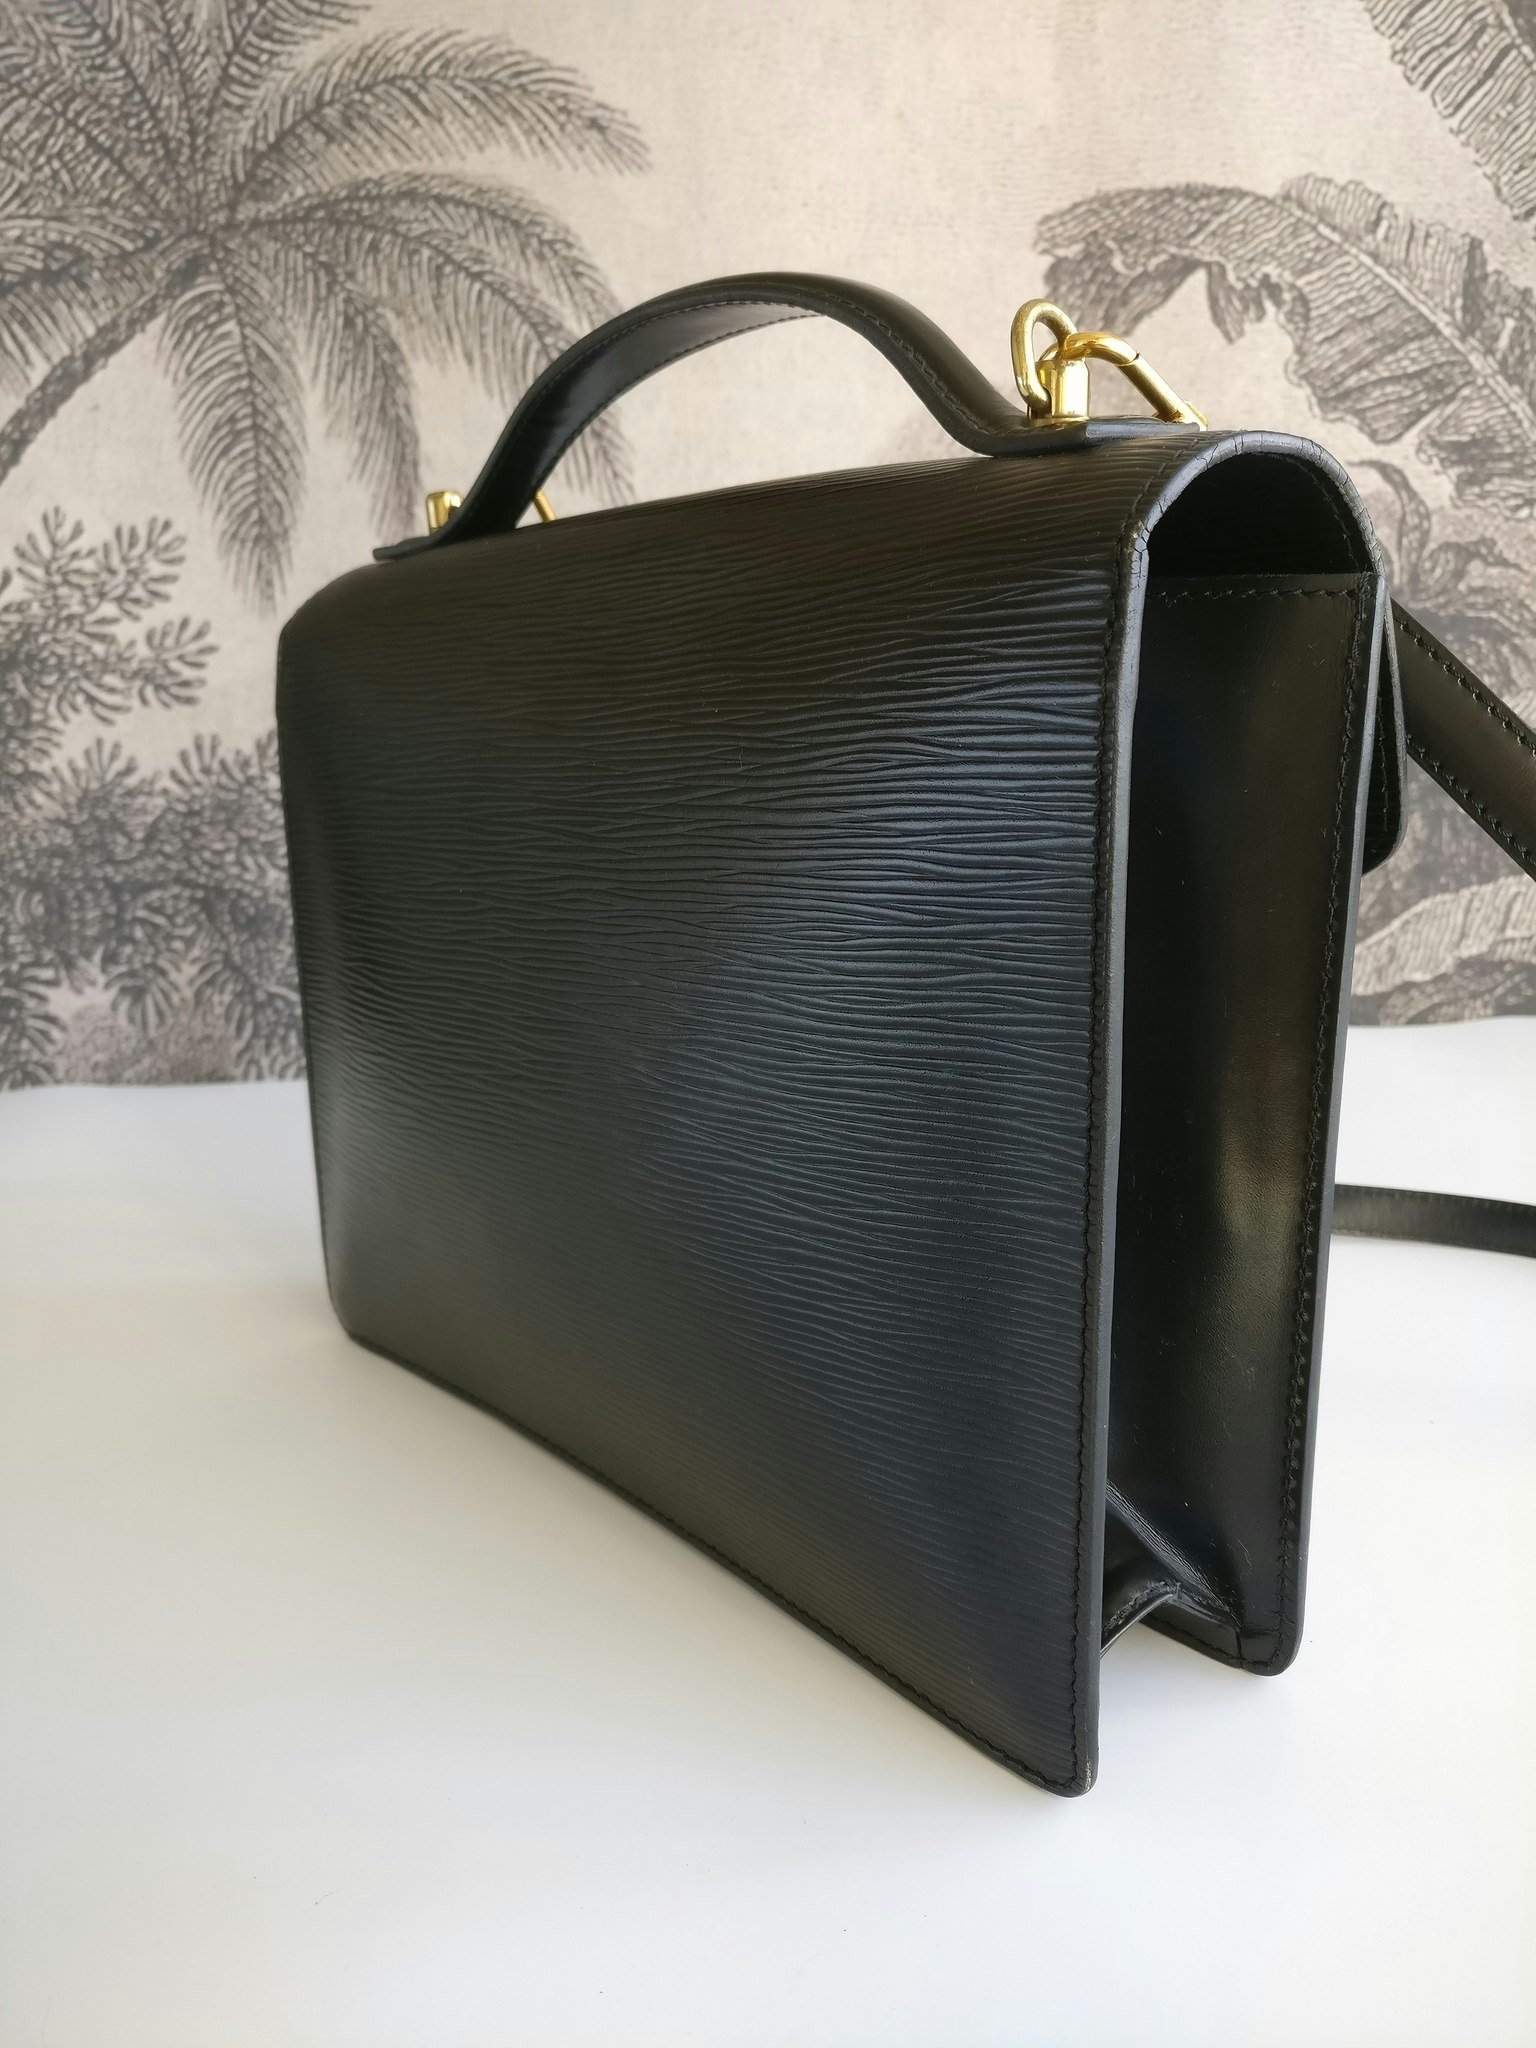 Buy Free Shipping [Used] LOUIS VUITTON Monceau Handbag Epi Noir Black  M52122 from Japan - Buy authentic Plus exclusive items from Japan